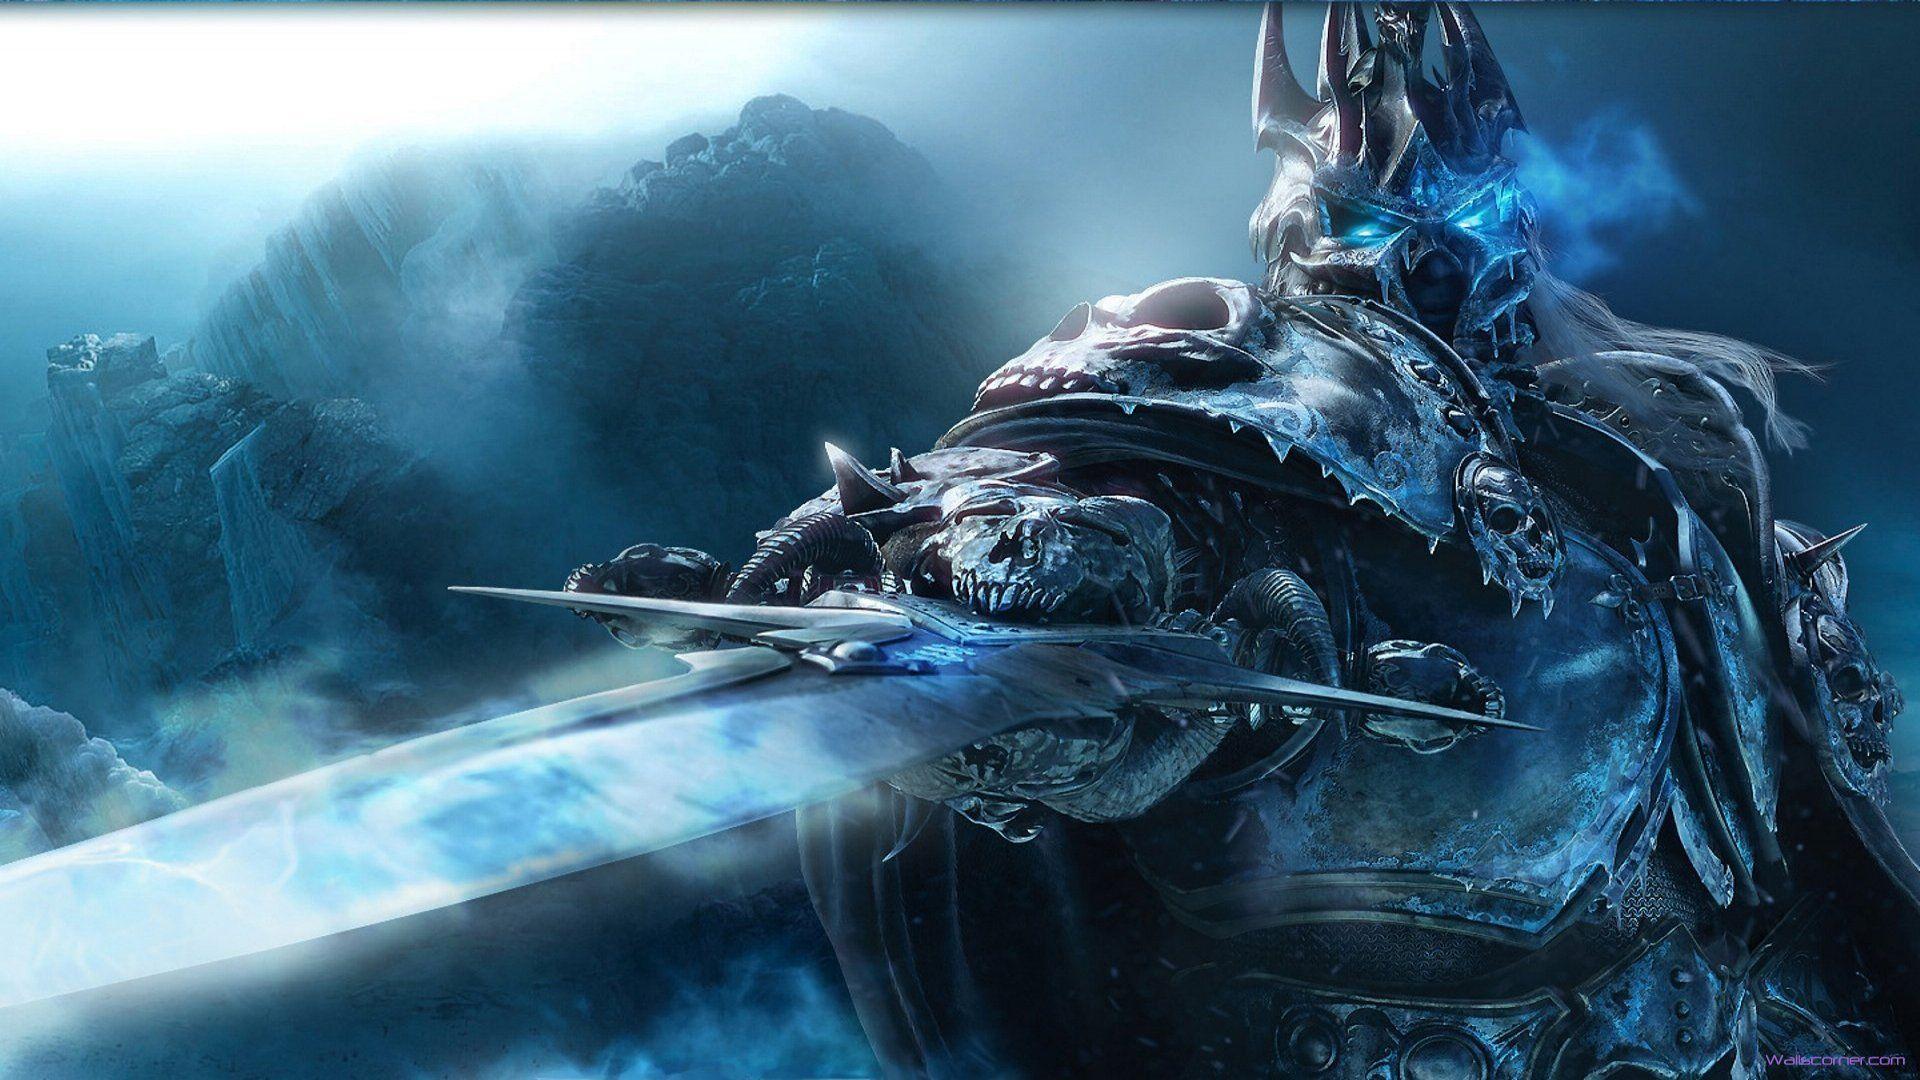 image For > Death Knight Wallpaper 1920x1080